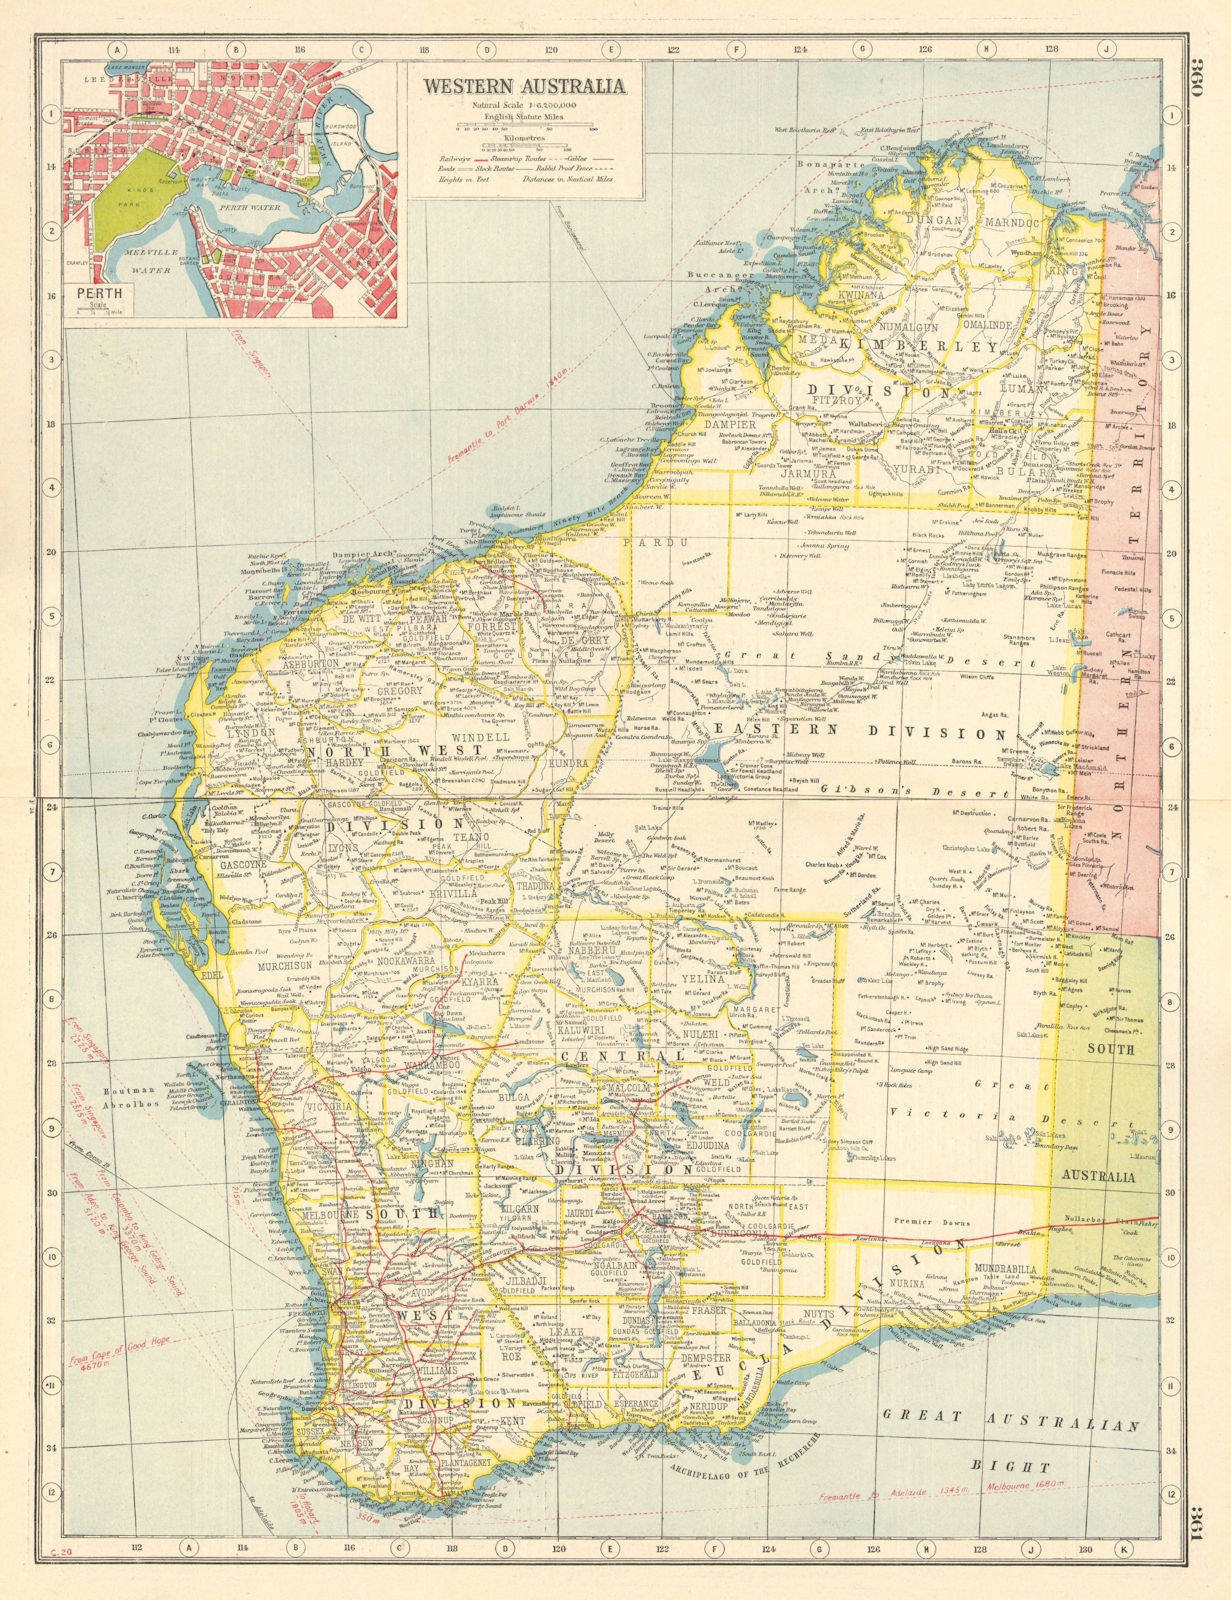 WESTERN AUSTRALIA. Inset plan of Perth. HARMSWORTH 1920 old antique map chart